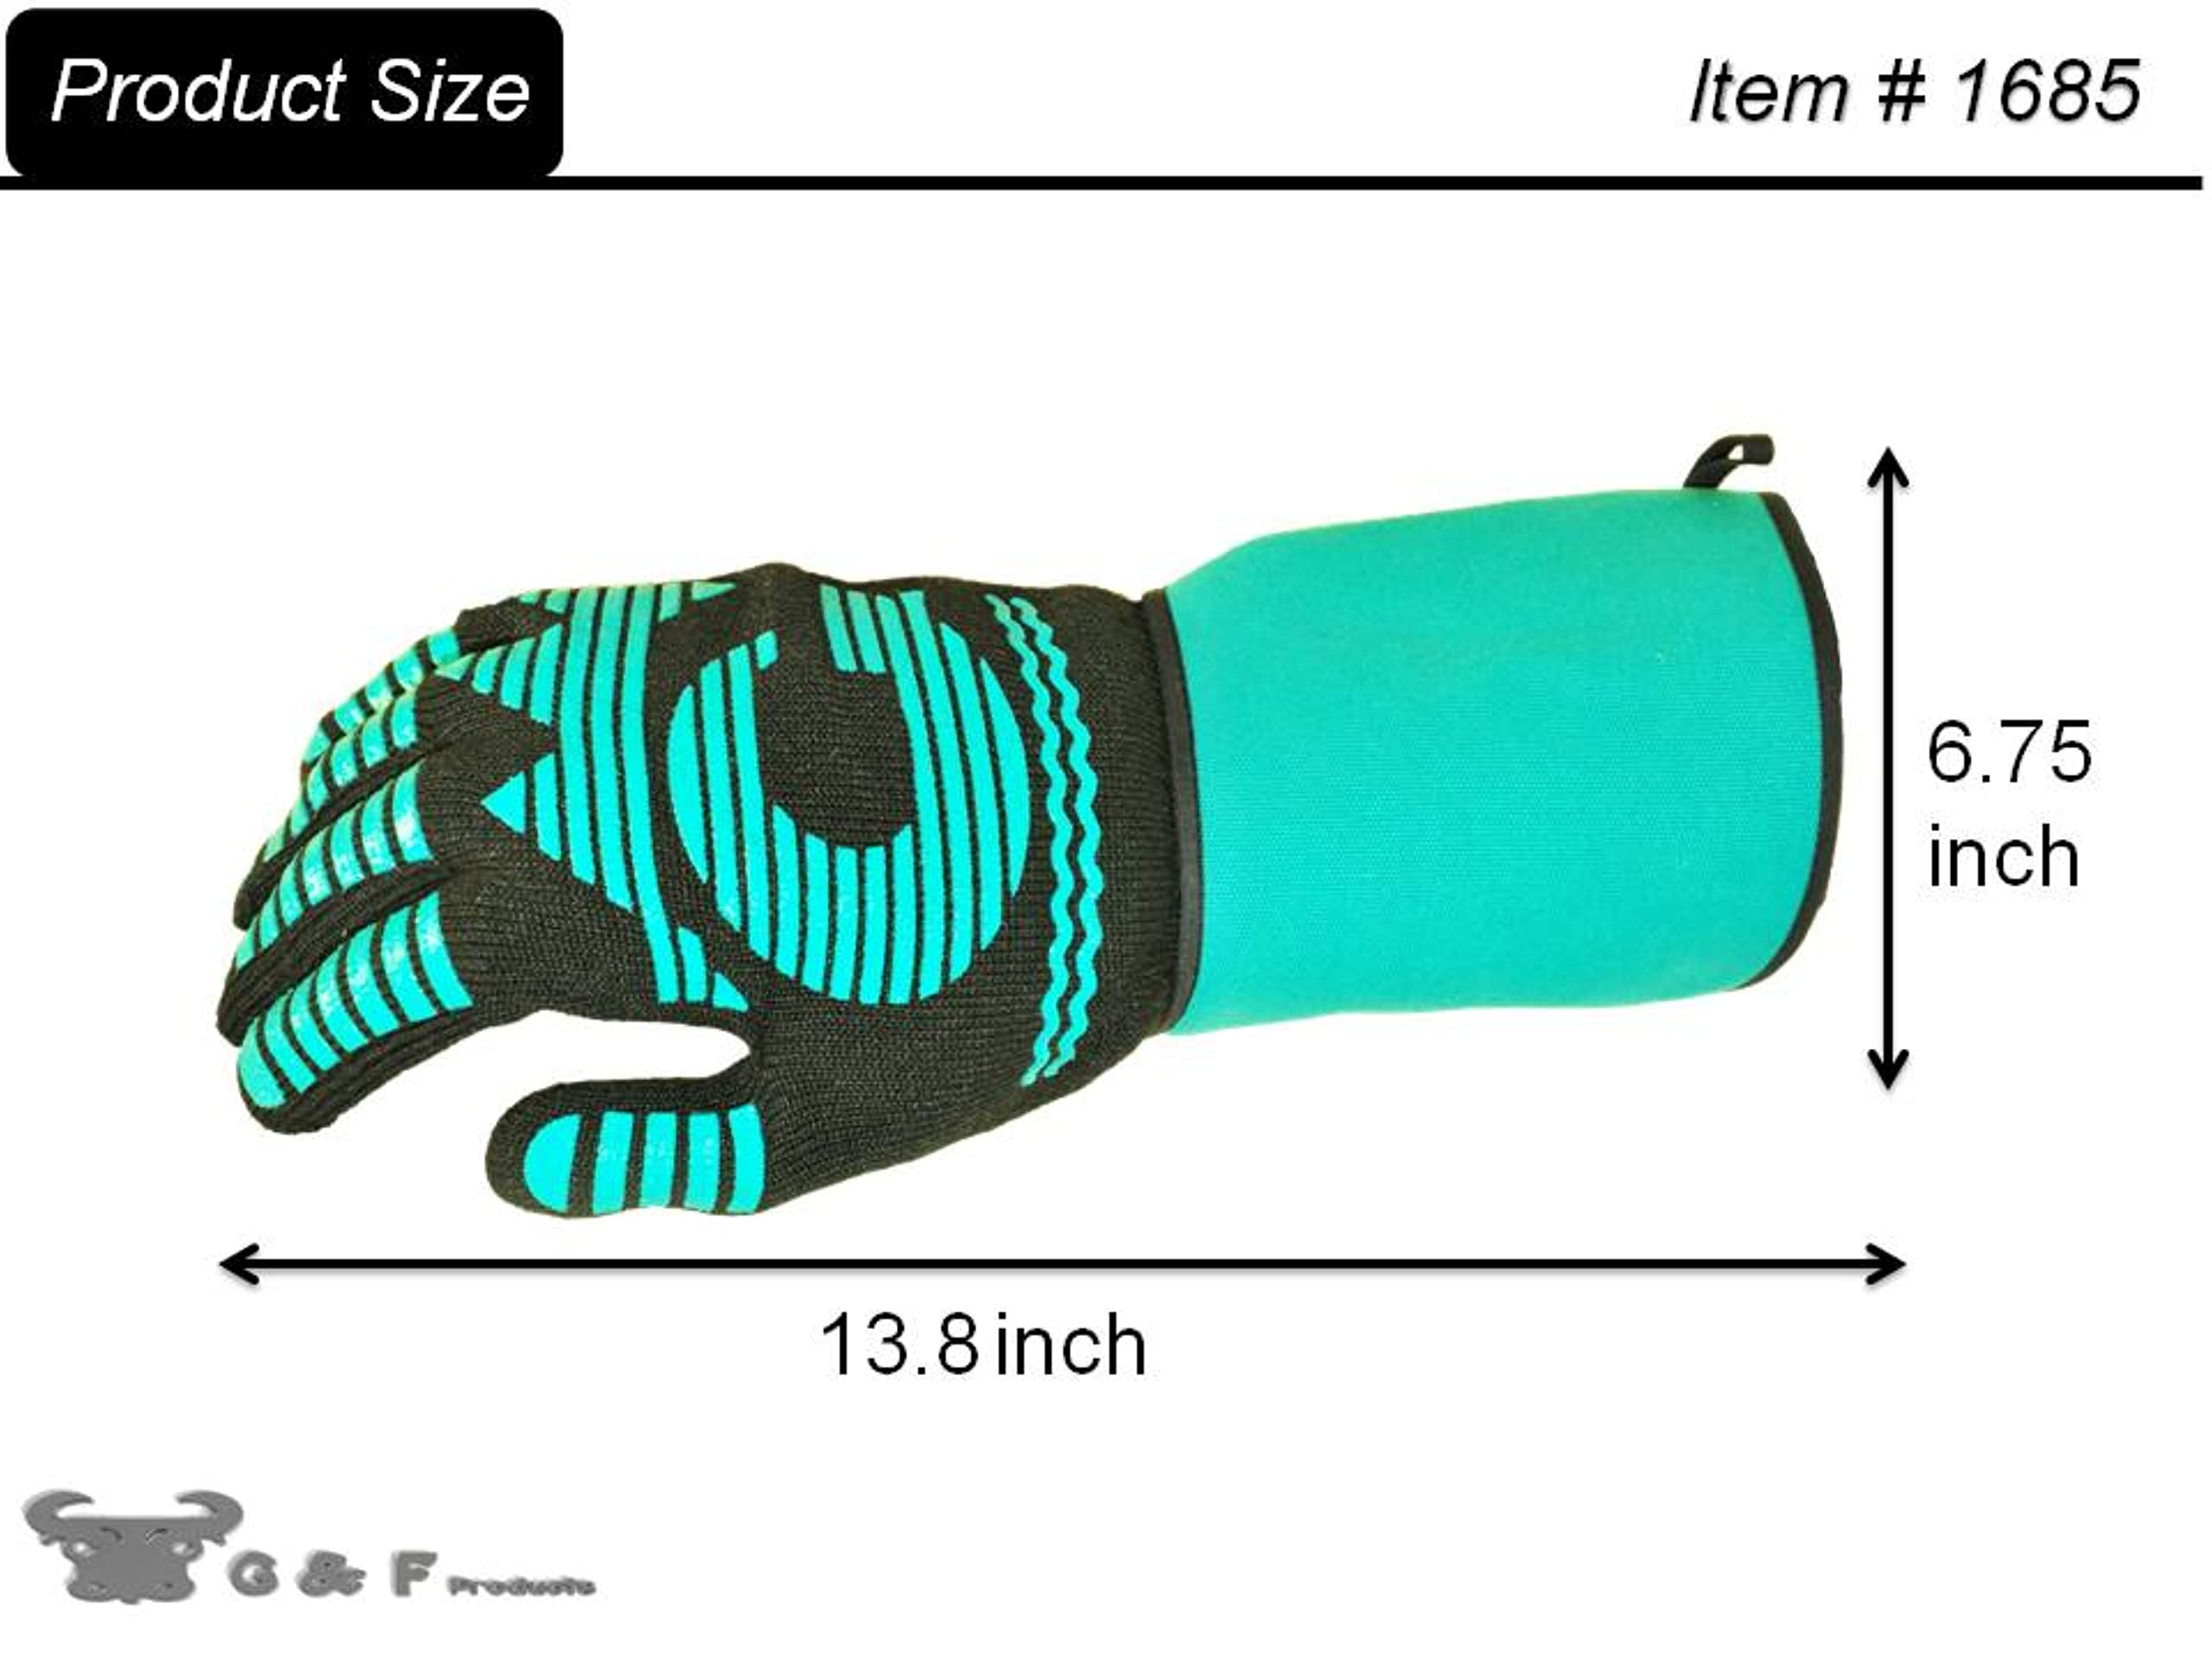 G & F 1685 1 Piece Heat Resistant BBQ Grilling Cooking Glove Mitt with Easy Slip on and off cuff, extra long and wide